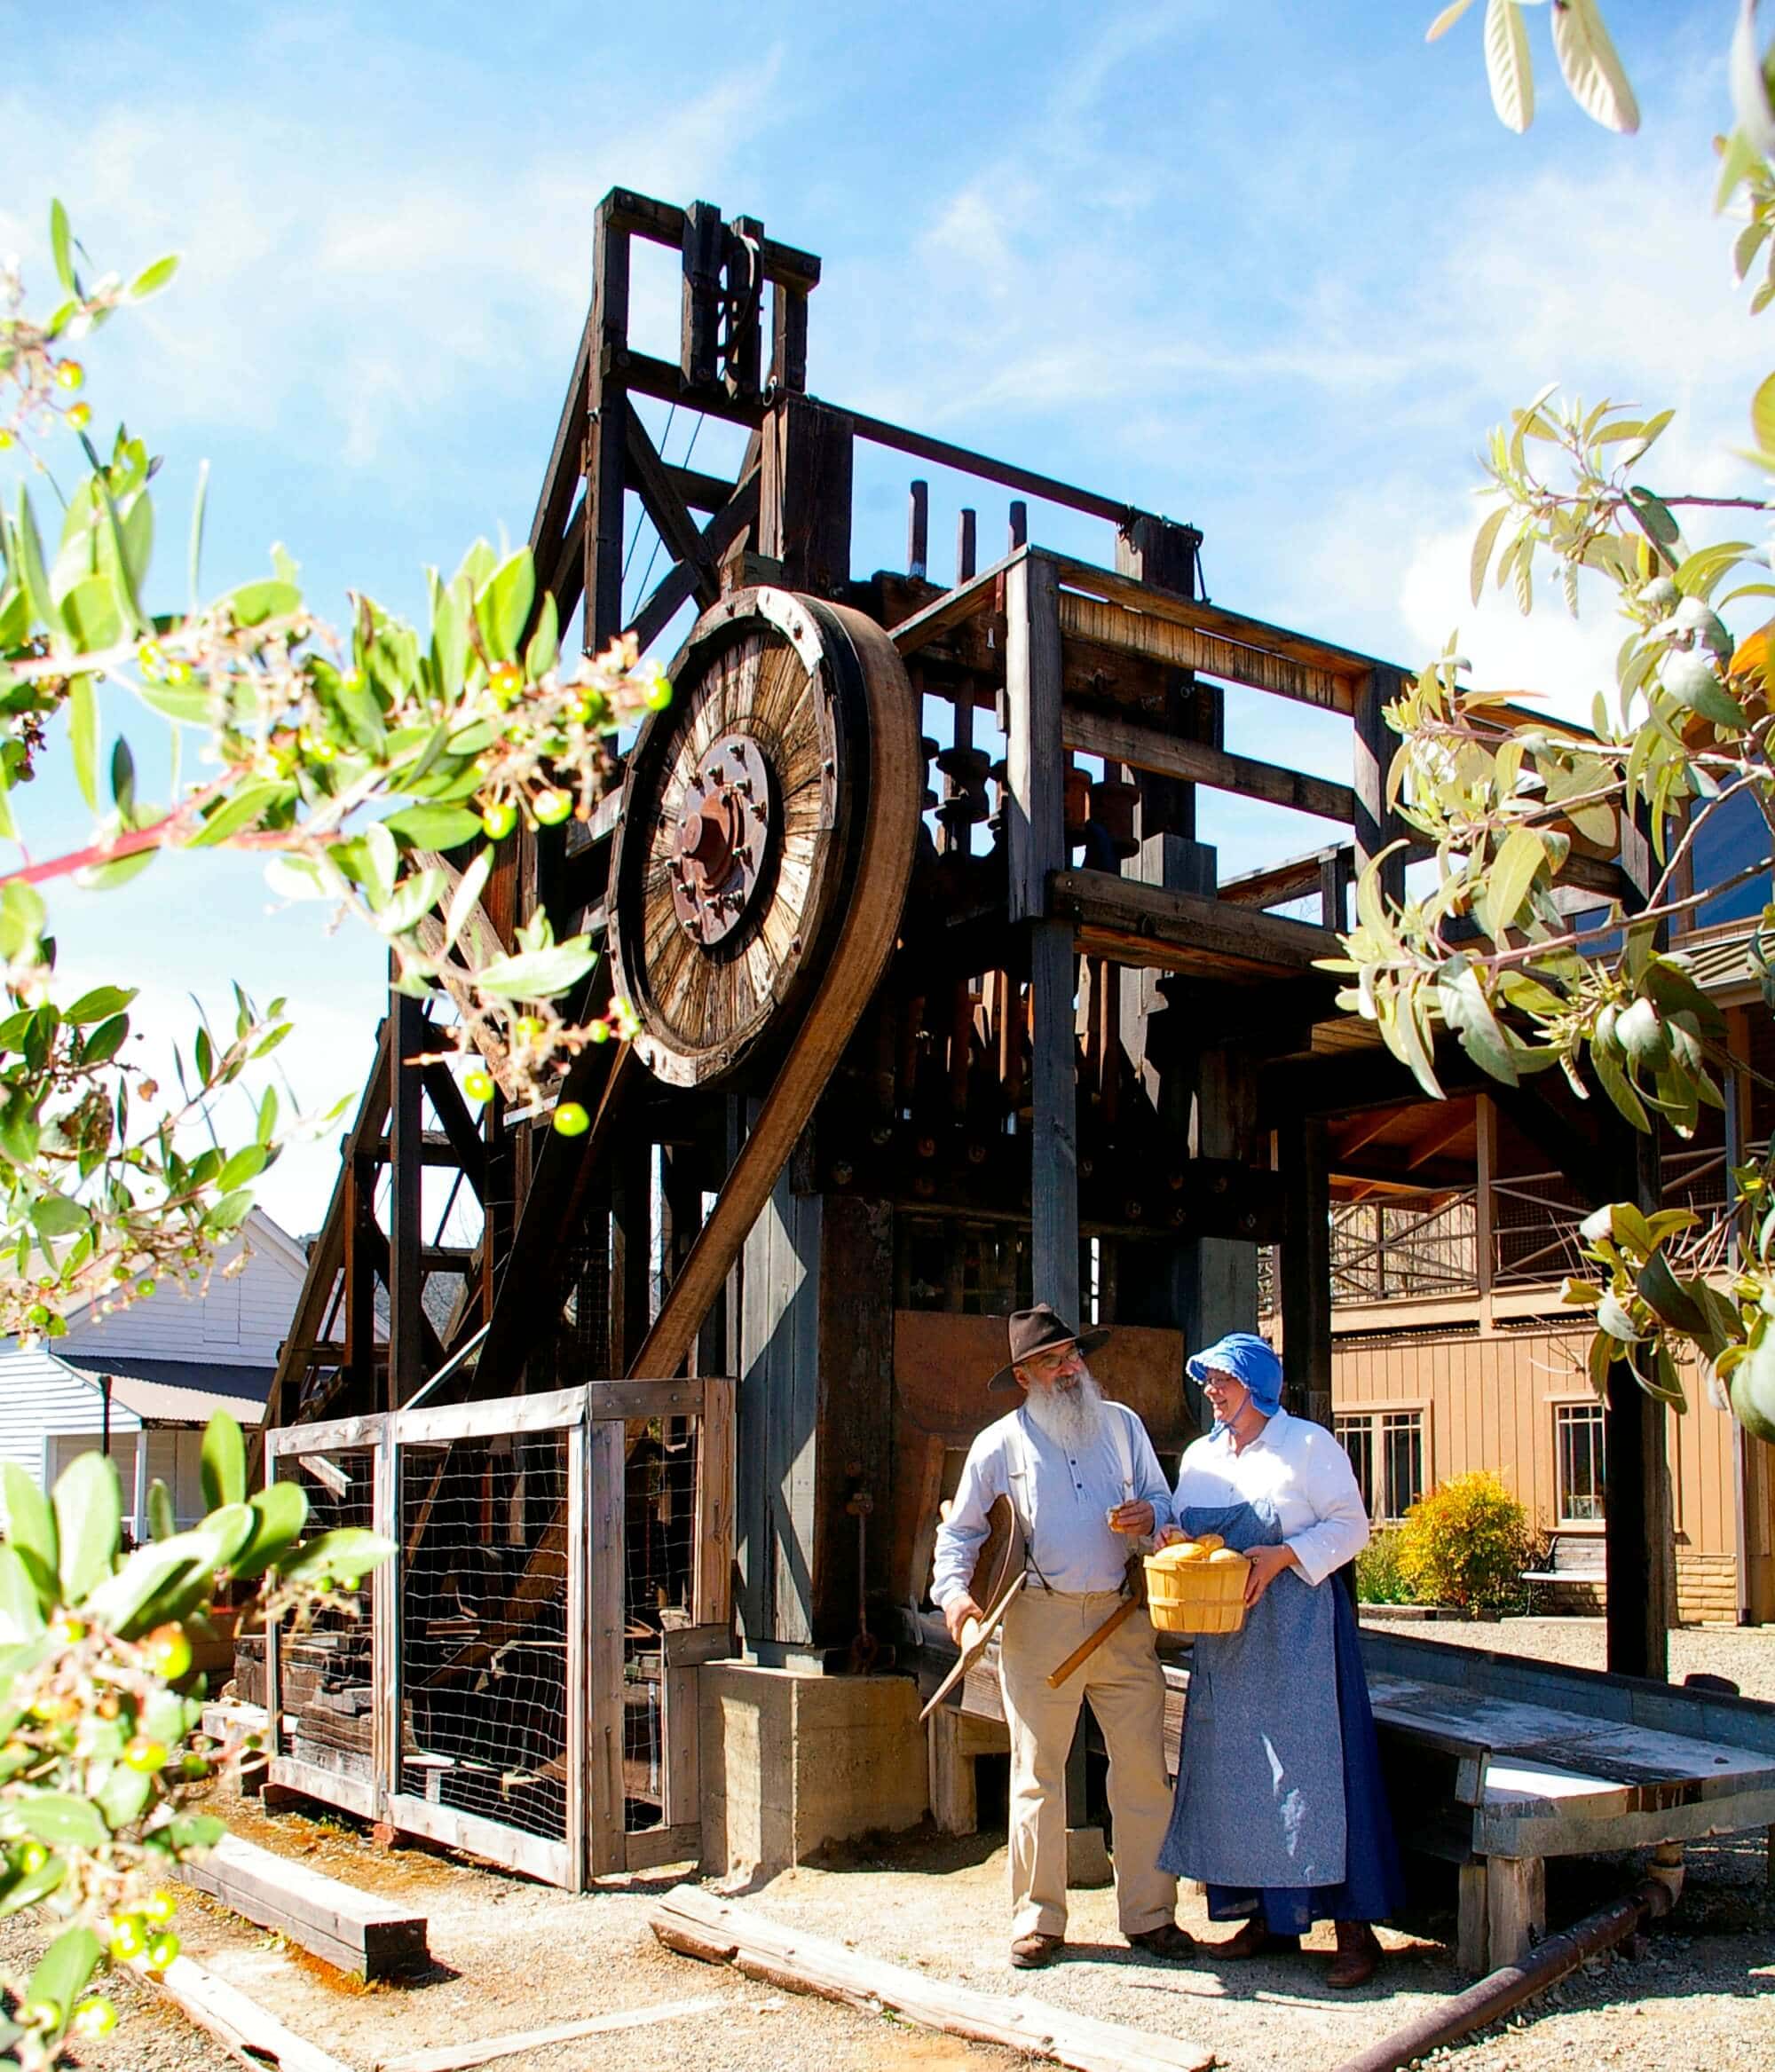 Man and woman in front of the working stamp mill